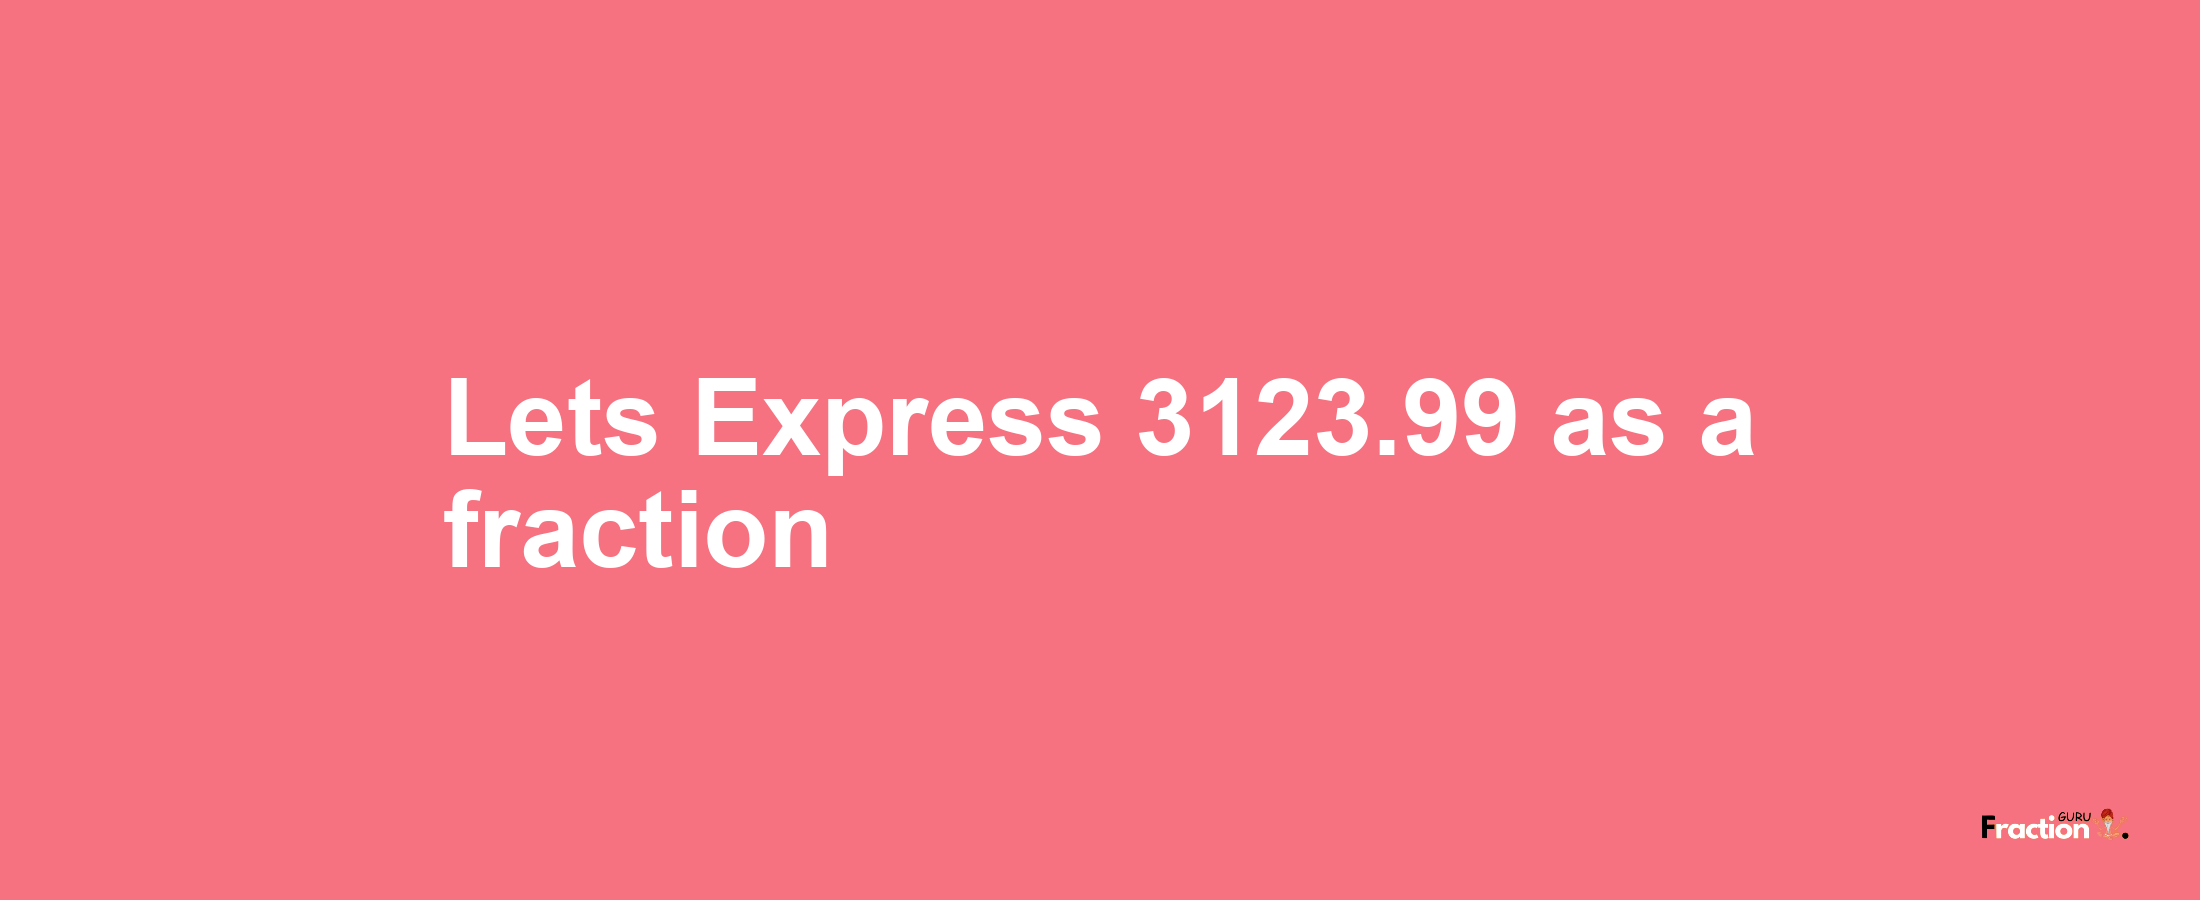 Lets Express 3123.99 as afraction